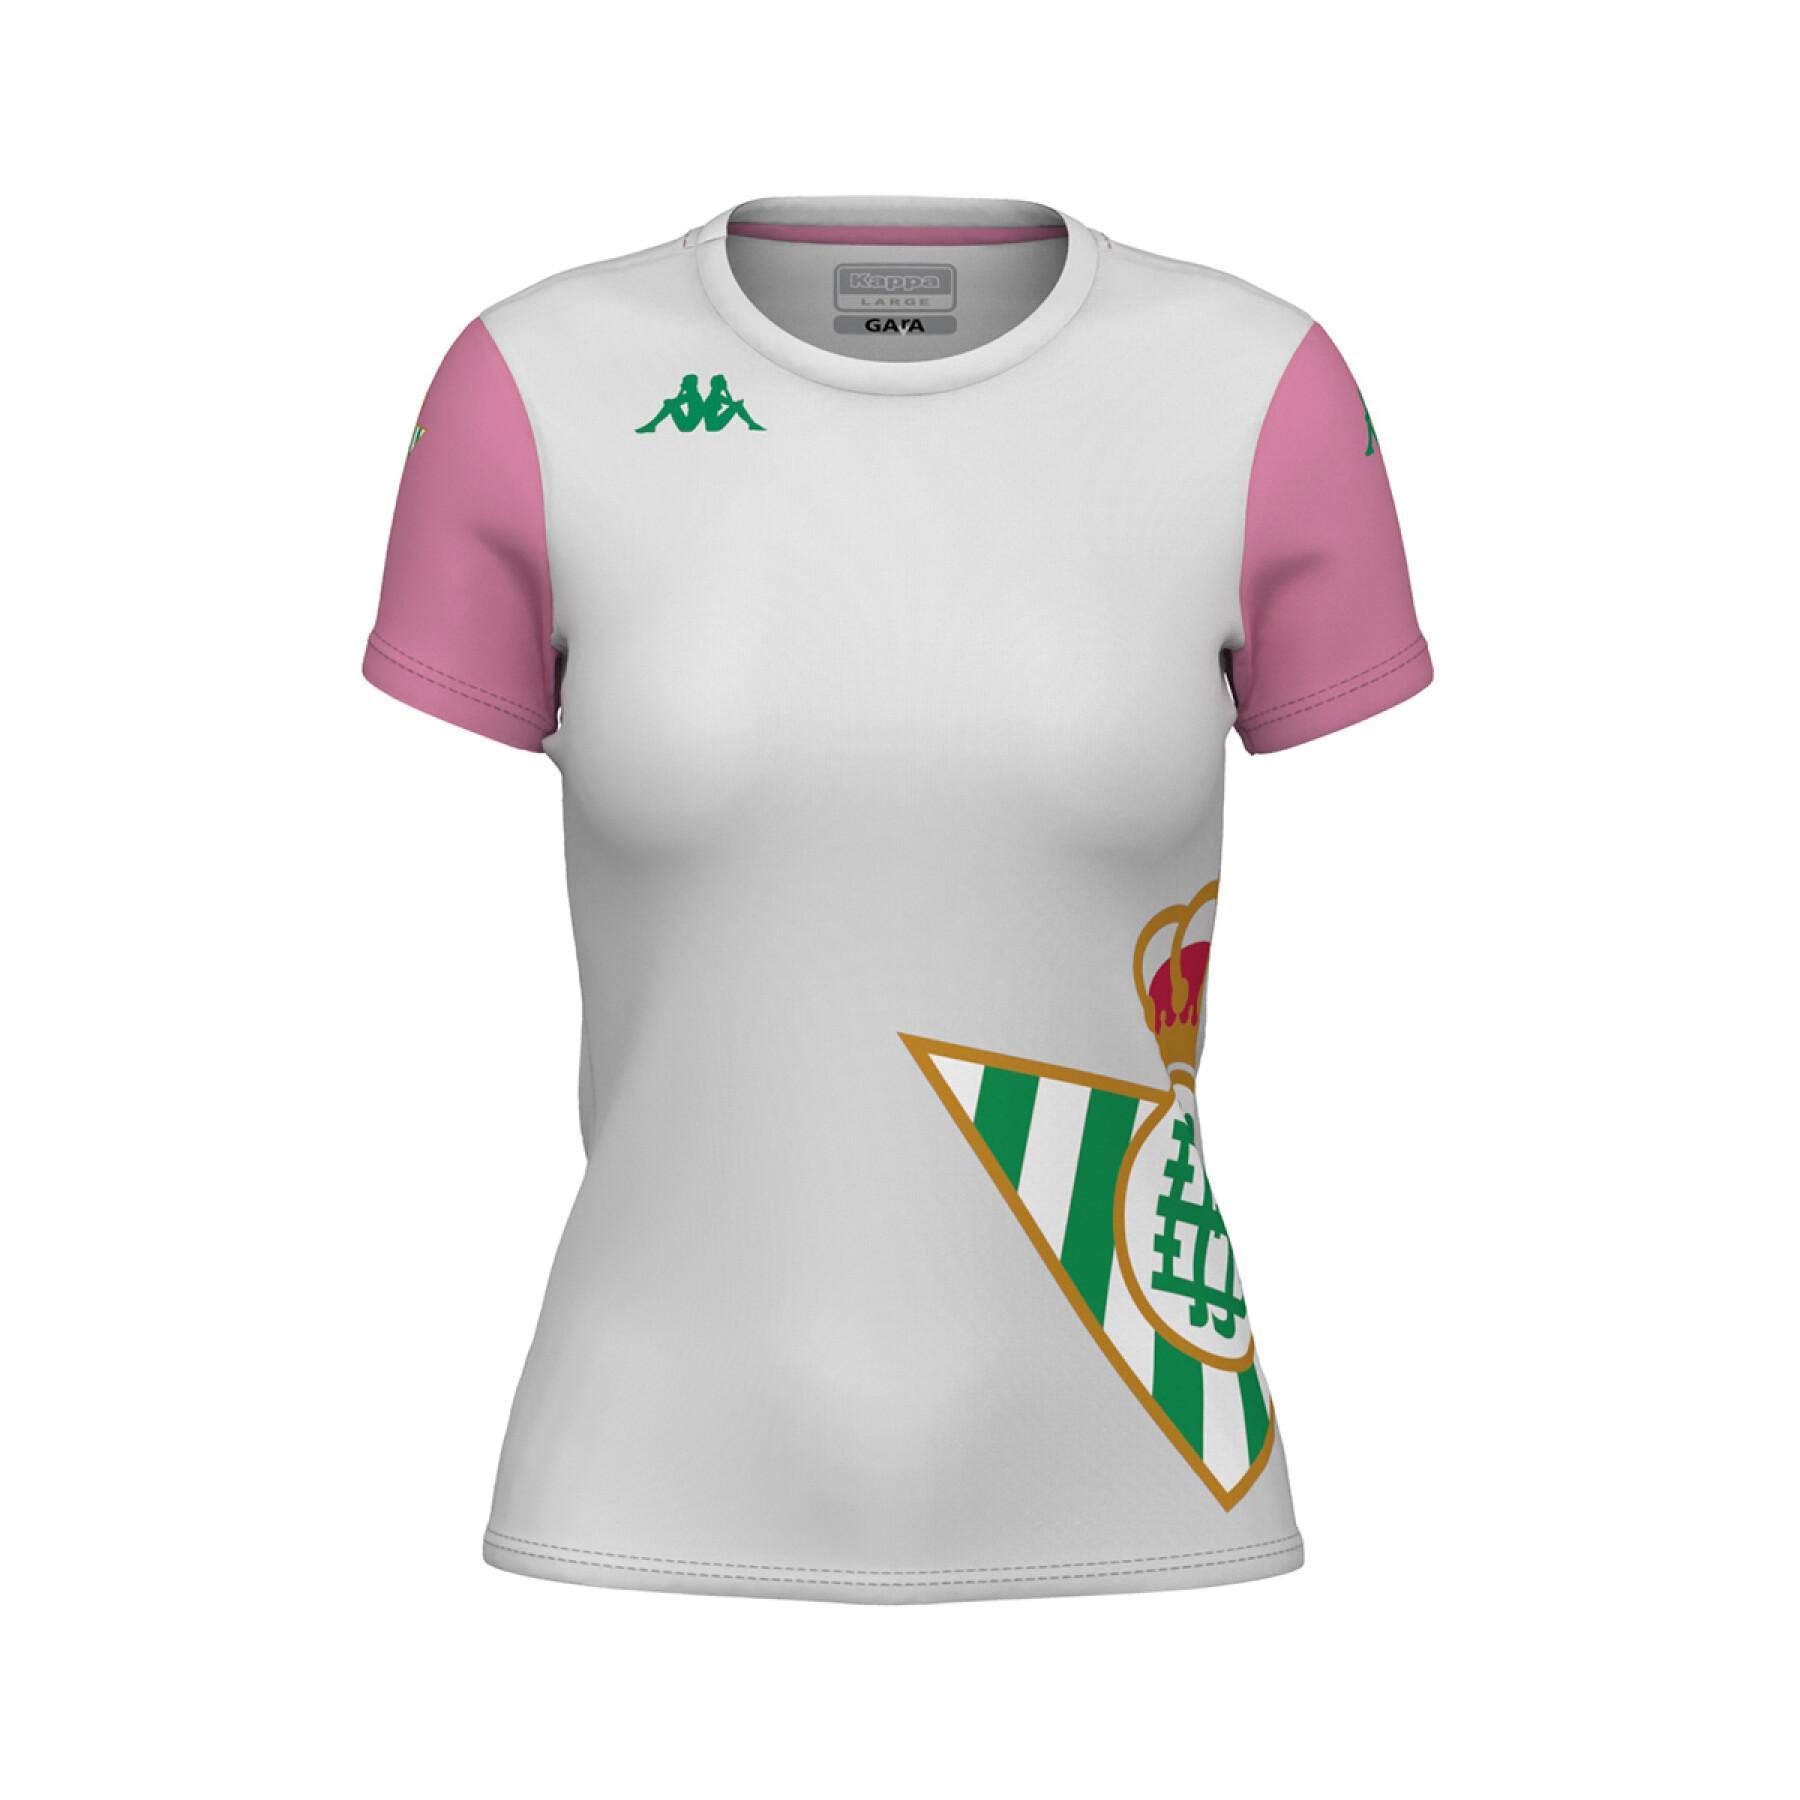 Obediencia Cosquillas canal Camiseta infantil real Betis Seville 2020/21 adiry